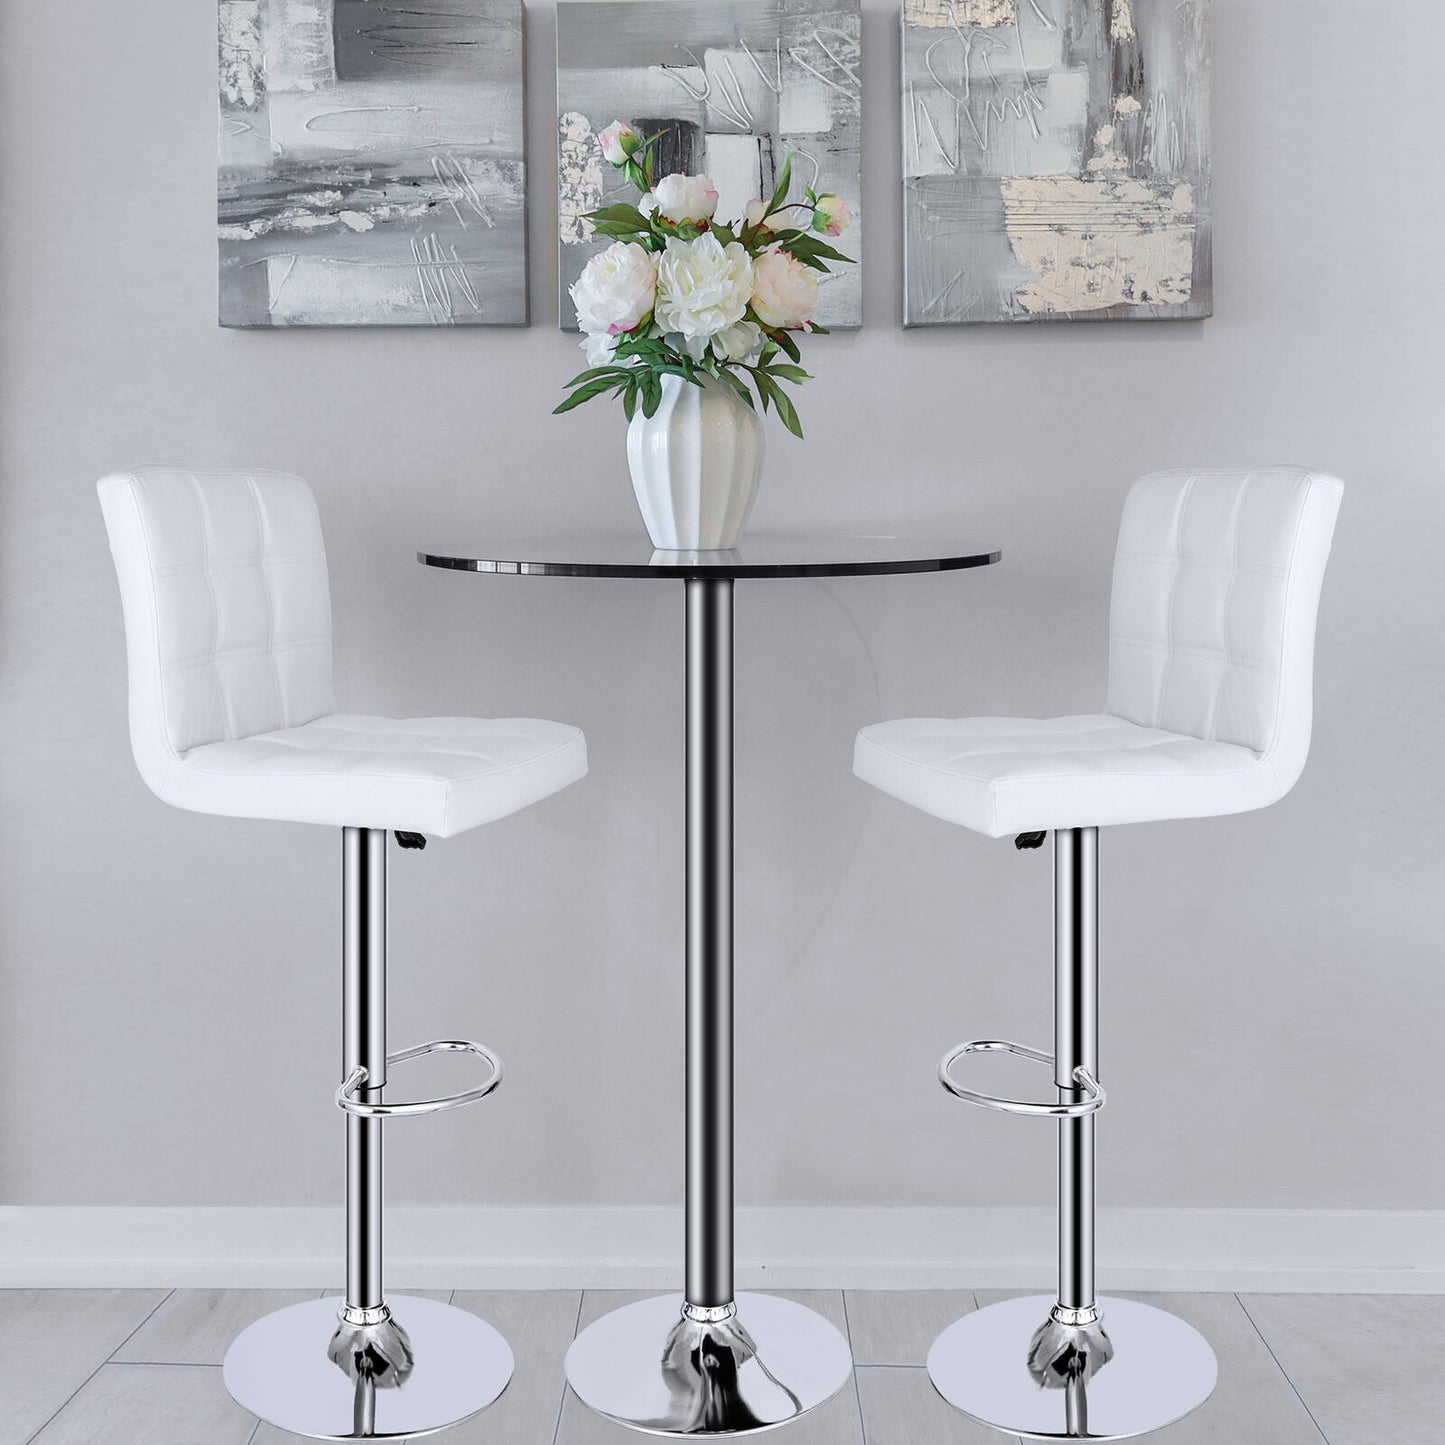 Set of 2 Adjustable Bar Stools PU Leather Modern Dinning Chair with White